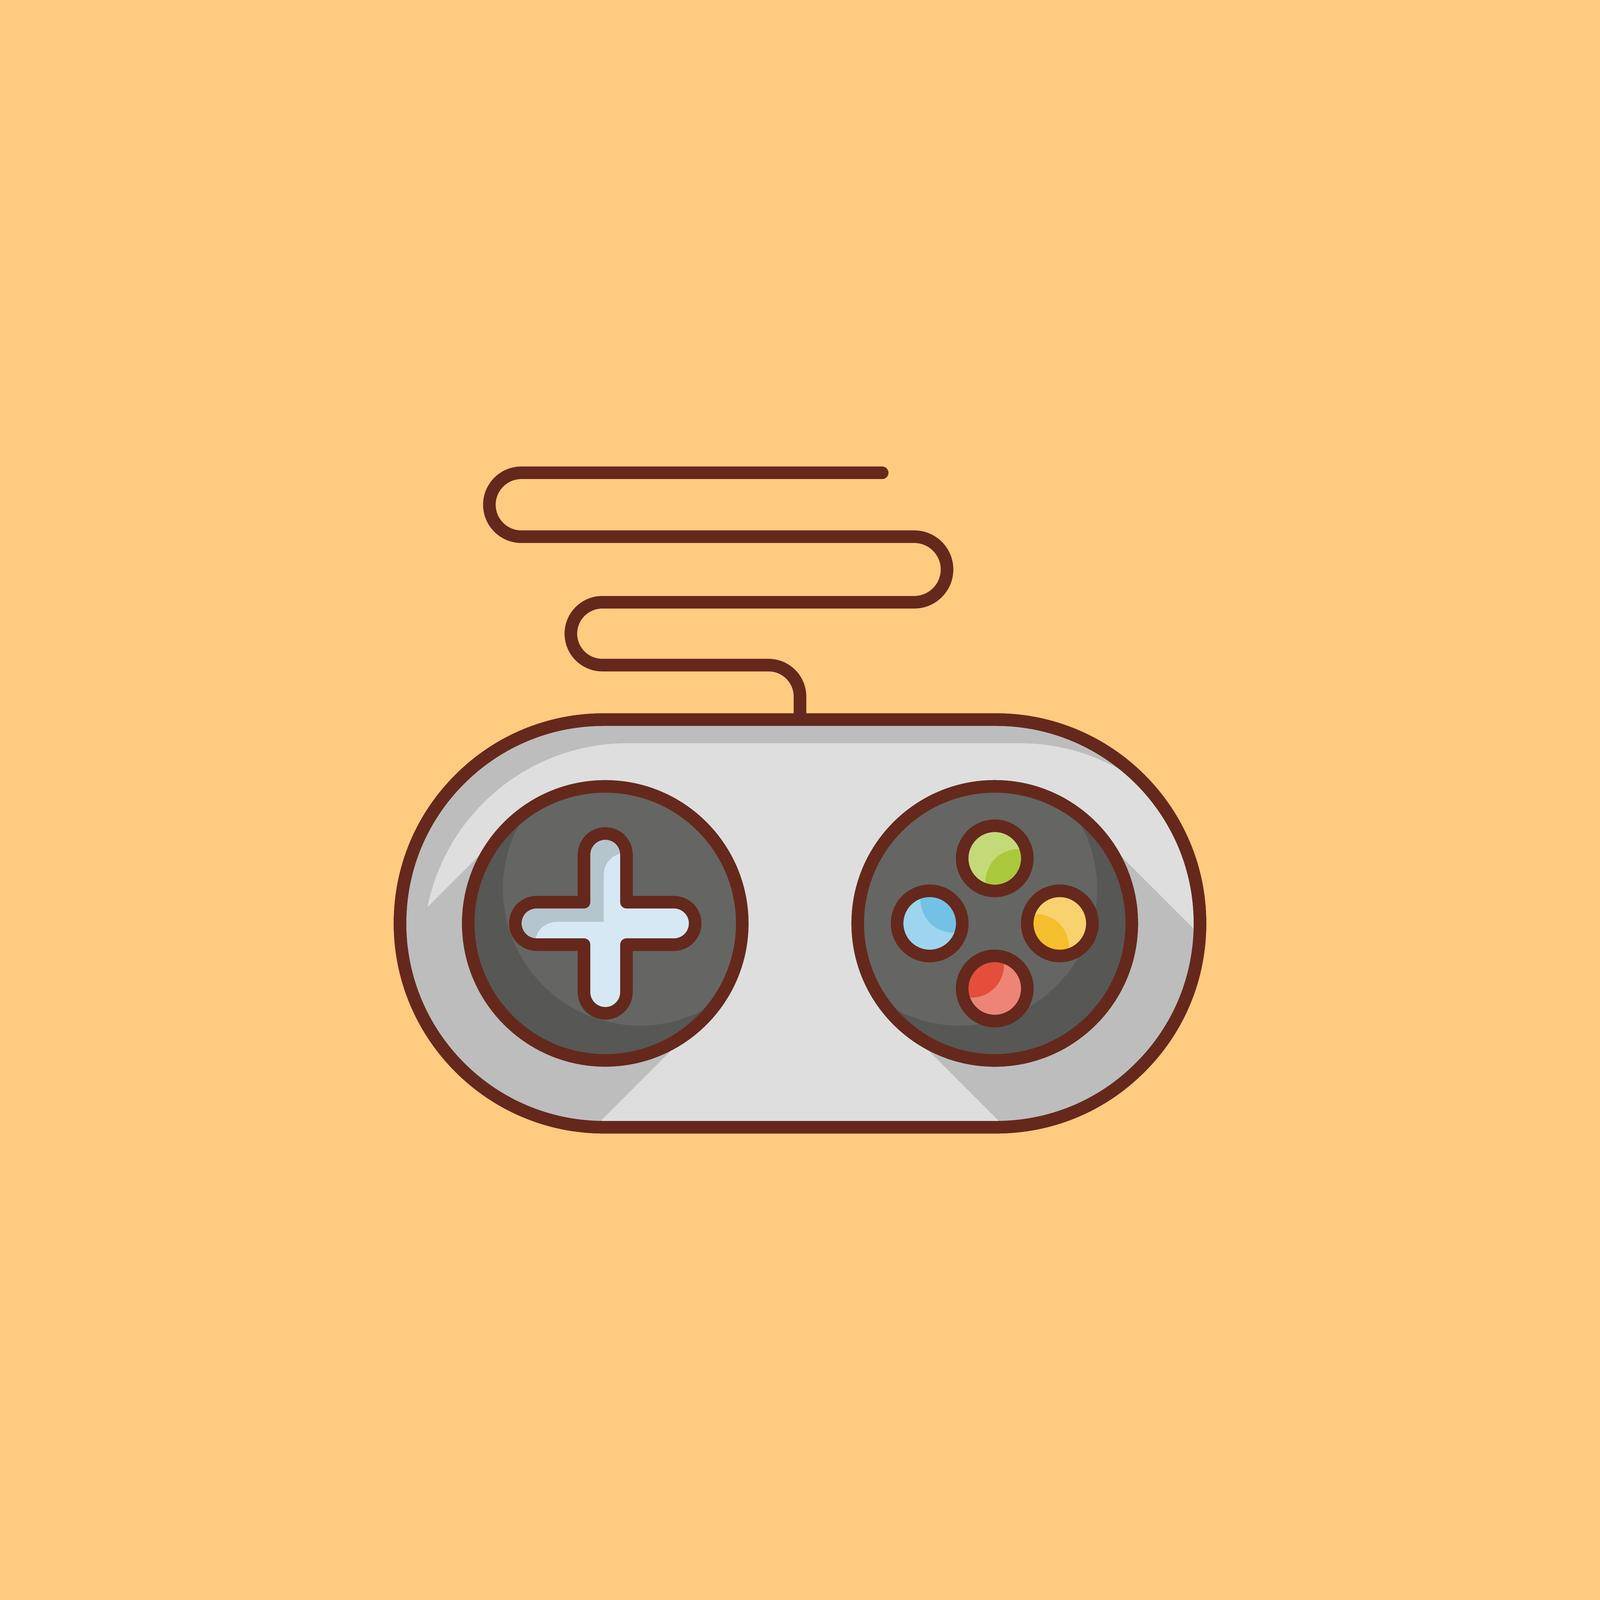 game by FlaticonsDesign